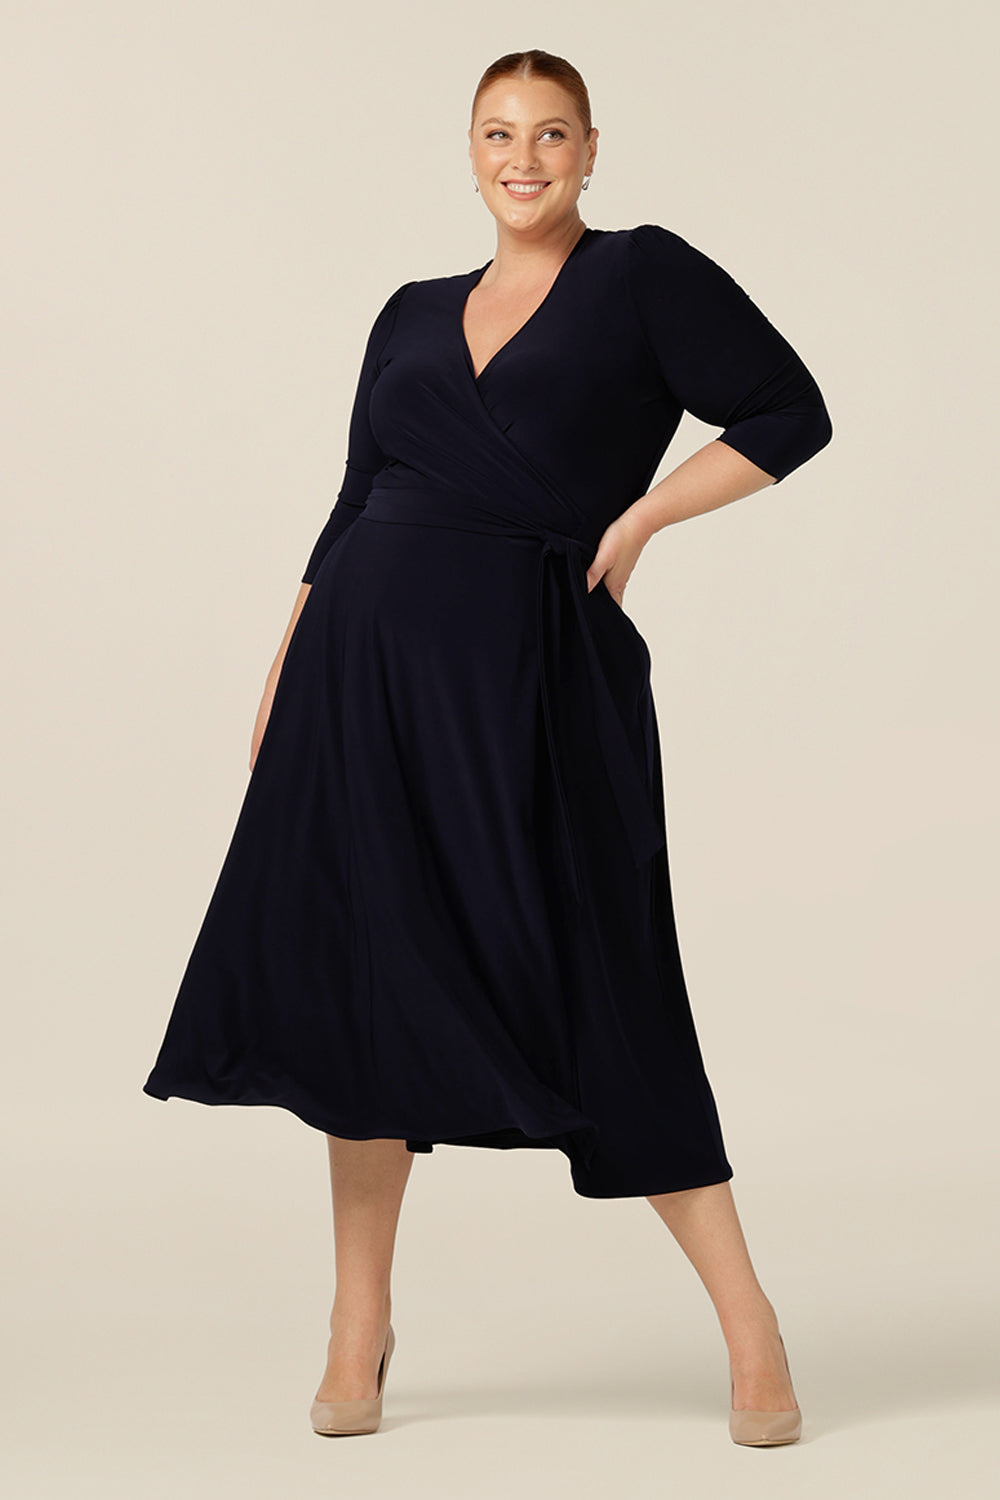 A plus size, fuller figure woman wears a 3/4 sleeve, jersey wrap dress in navy blue. A full, below-the-knee-length wrap dress, the Fiona Dress wears well as an elegant workwear dress as well as for occasion and event wear. 